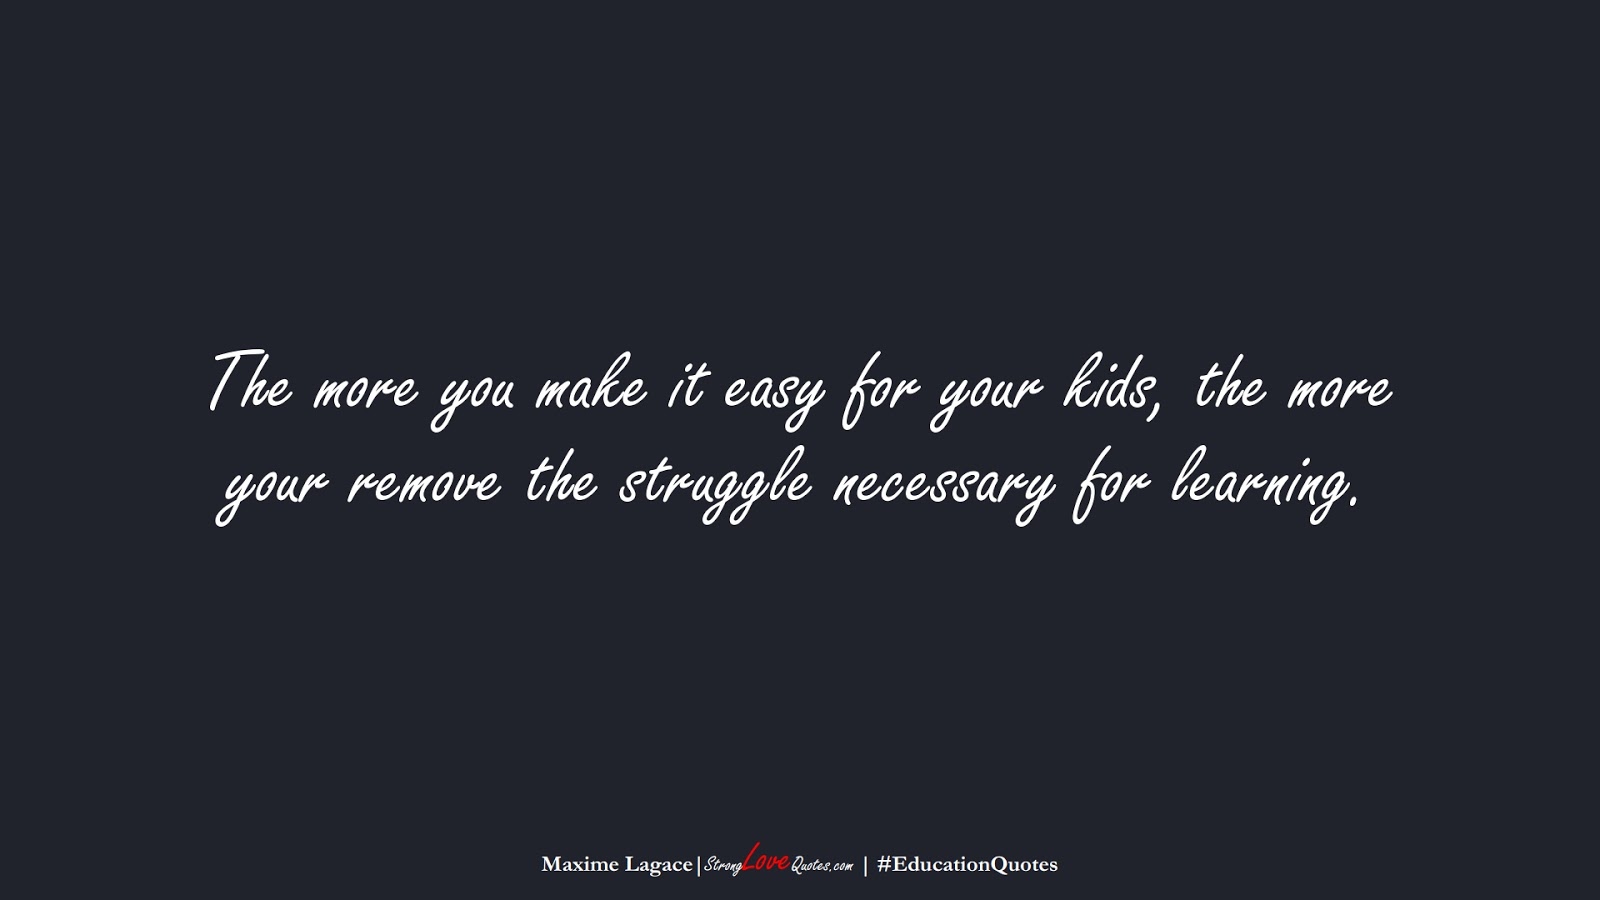 The more you make it easy for your kids, the more your remove the struggle necessary for learning. (Maxime Lagace);  #EducationQuotes